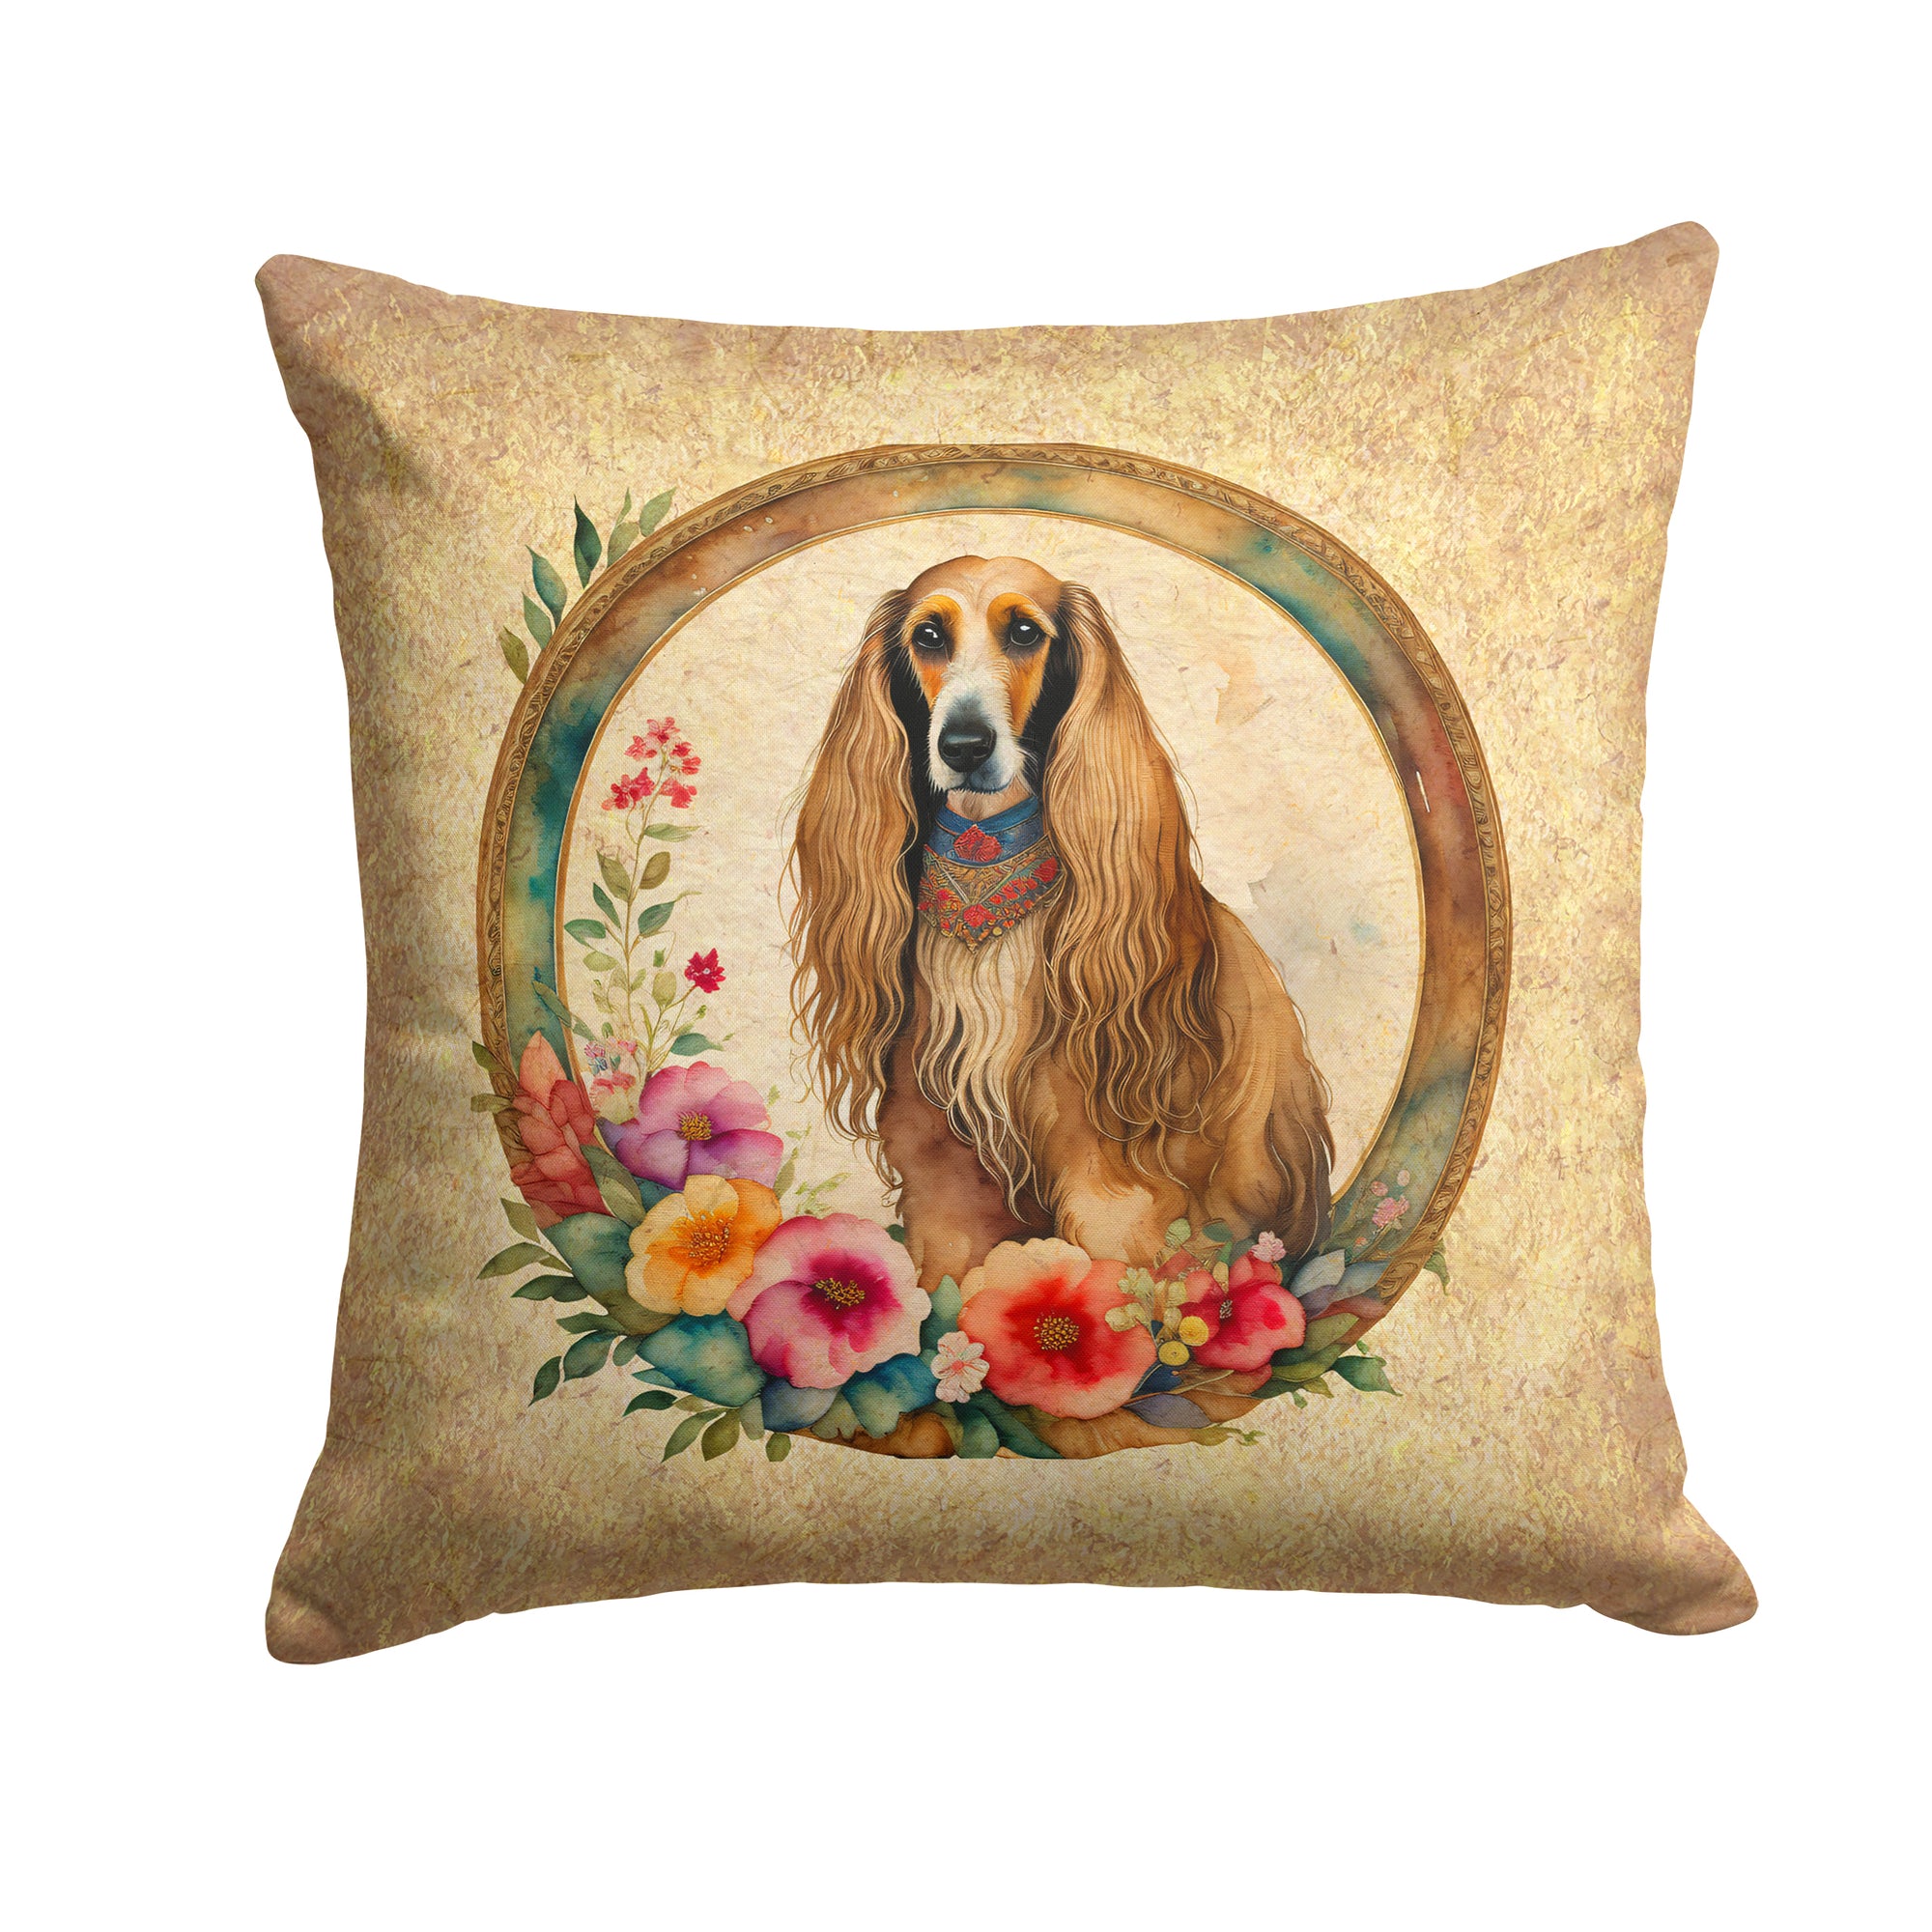 Buy this Afghan Hound and Flowers Fabric Decorative Pillow